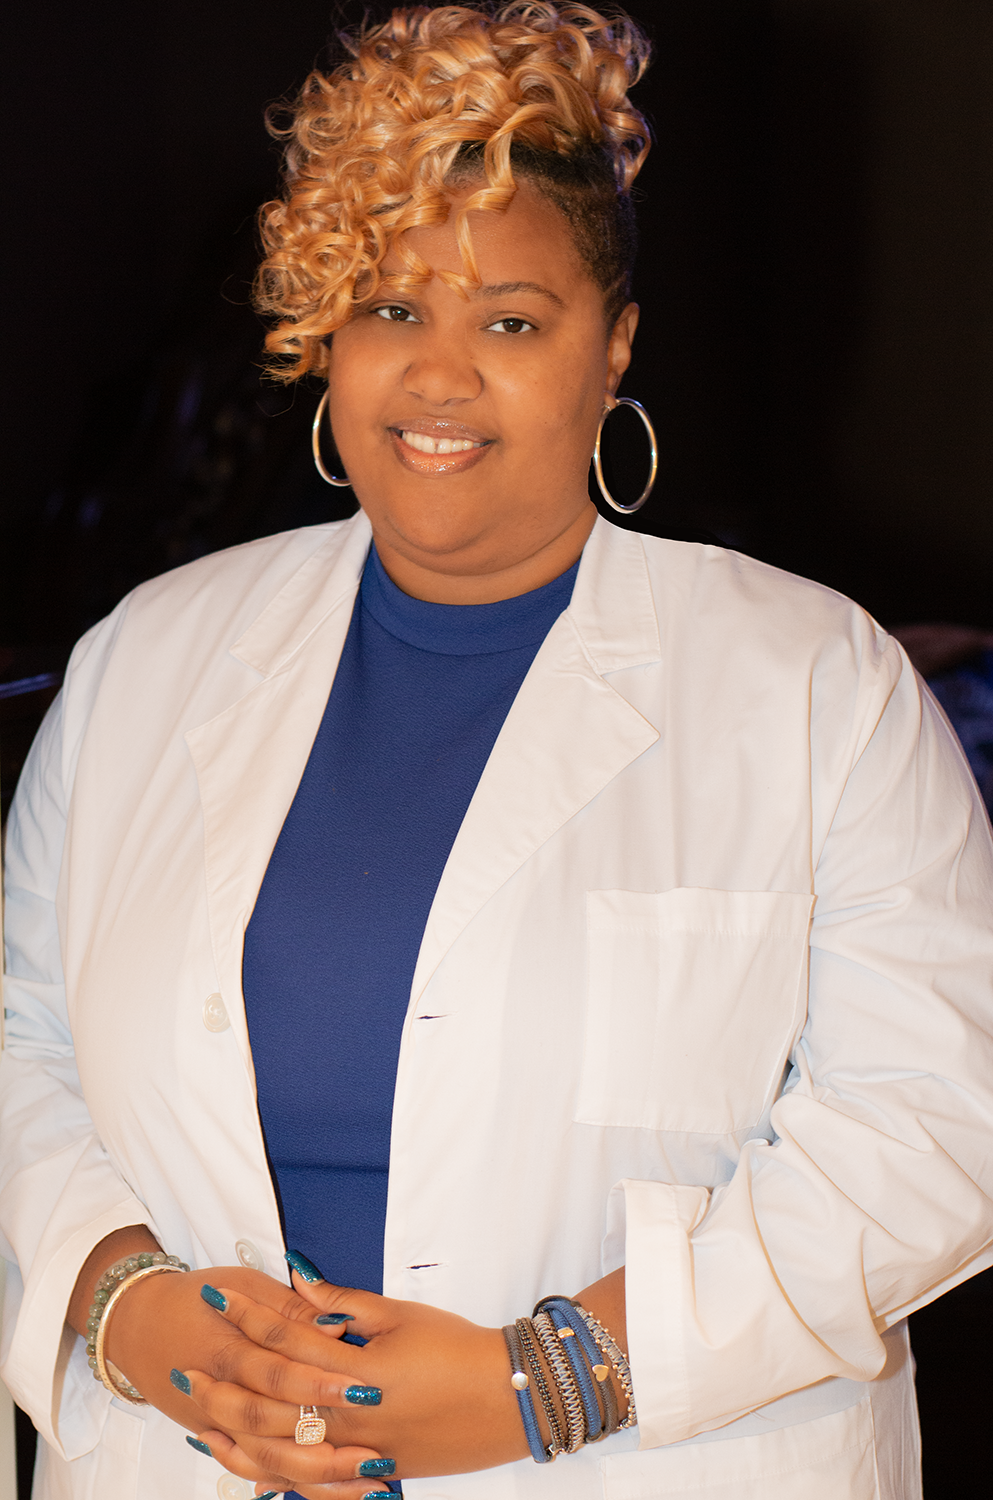 "Marquis Who's Who Awards" winner Dr. Jasmine Kearse is making mental healthcare accessible to everyone